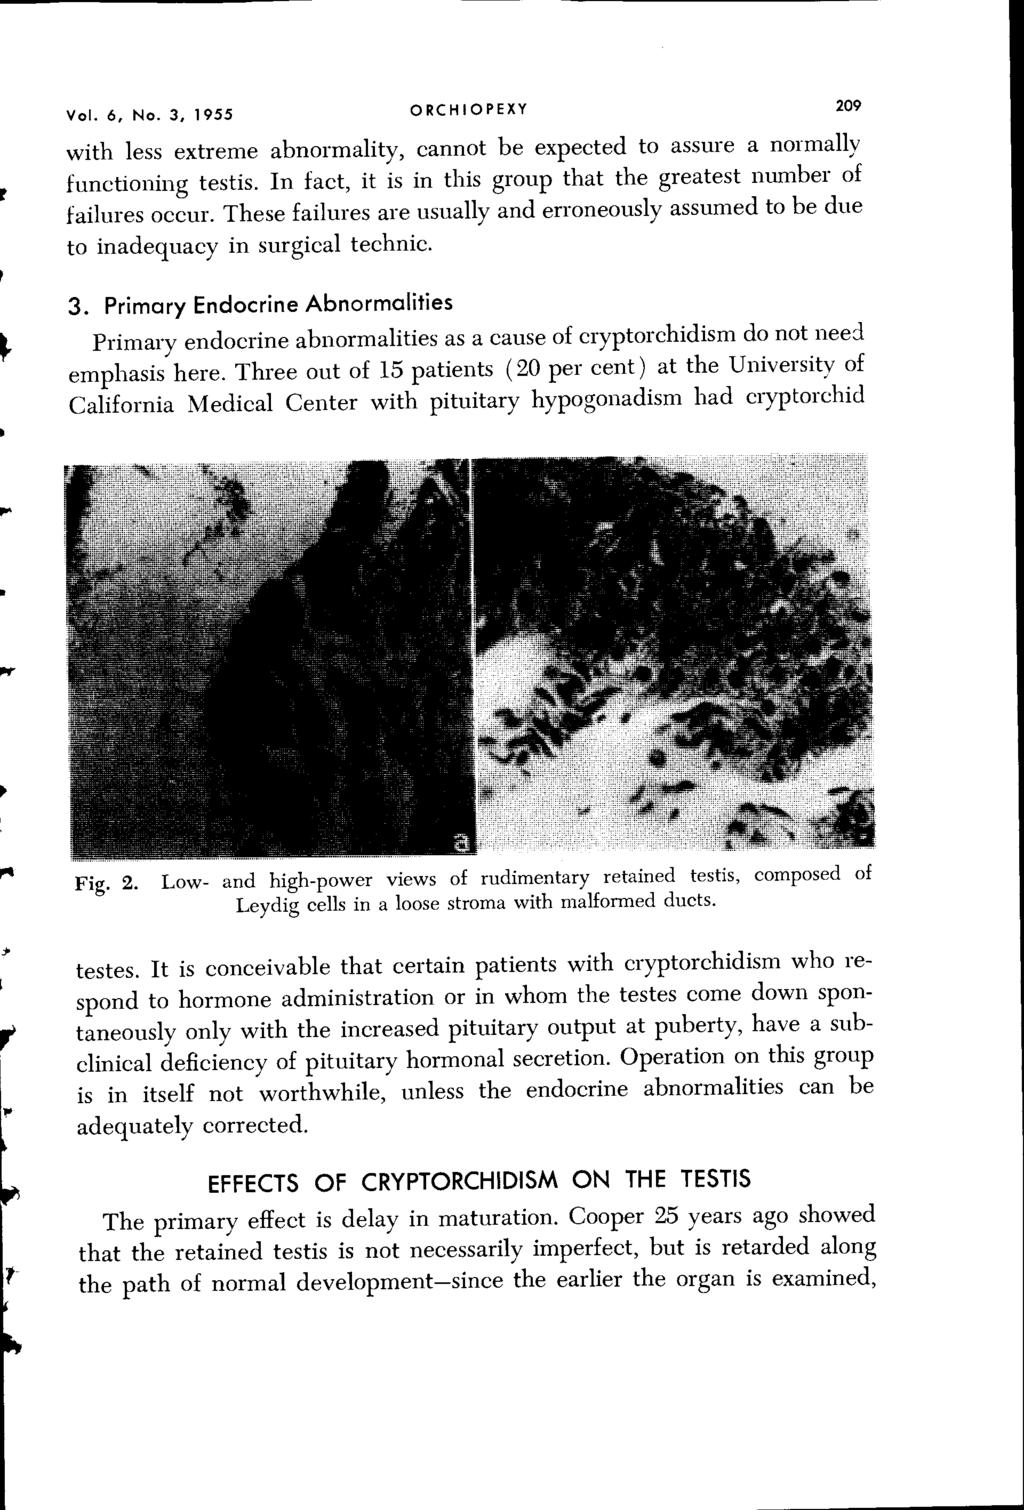 Vol. 6, No.3, 1955 ORCHIOPEXY 209 with less extreme abnormality, cannot be expected to assure a normally functioning testis. In fact, it is in this group that the greatest number of failures occur.